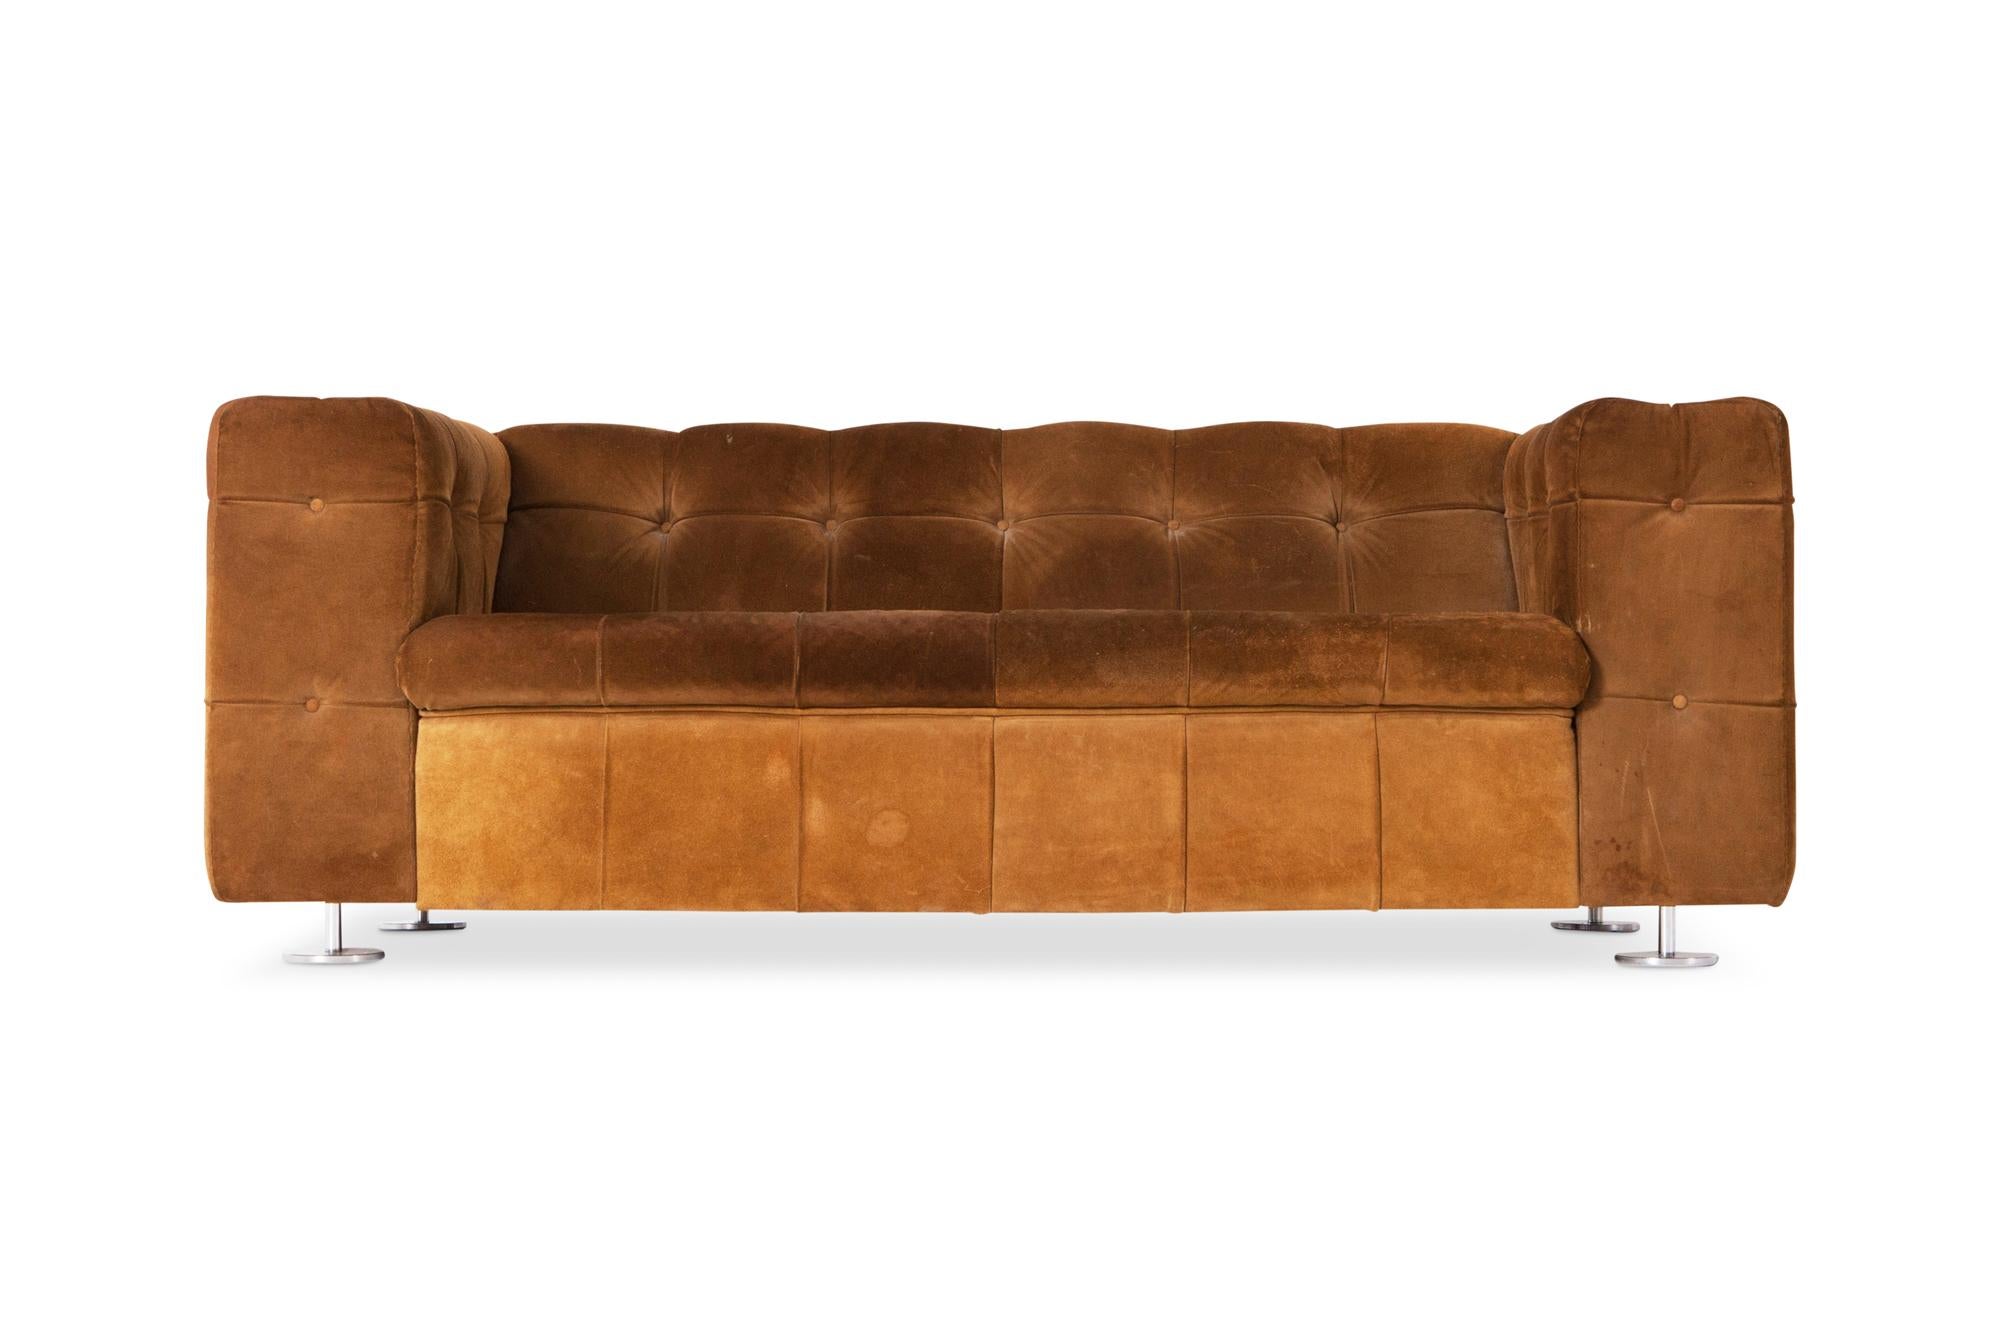 Italian camel colored suede leather sofa, made in the 1970s. The tufted design makes it a very cozy piece with a lot of character and patina, like a Mid-Century Modern chesterfield, also very reminding of the designs of Harvey Probber, Edward